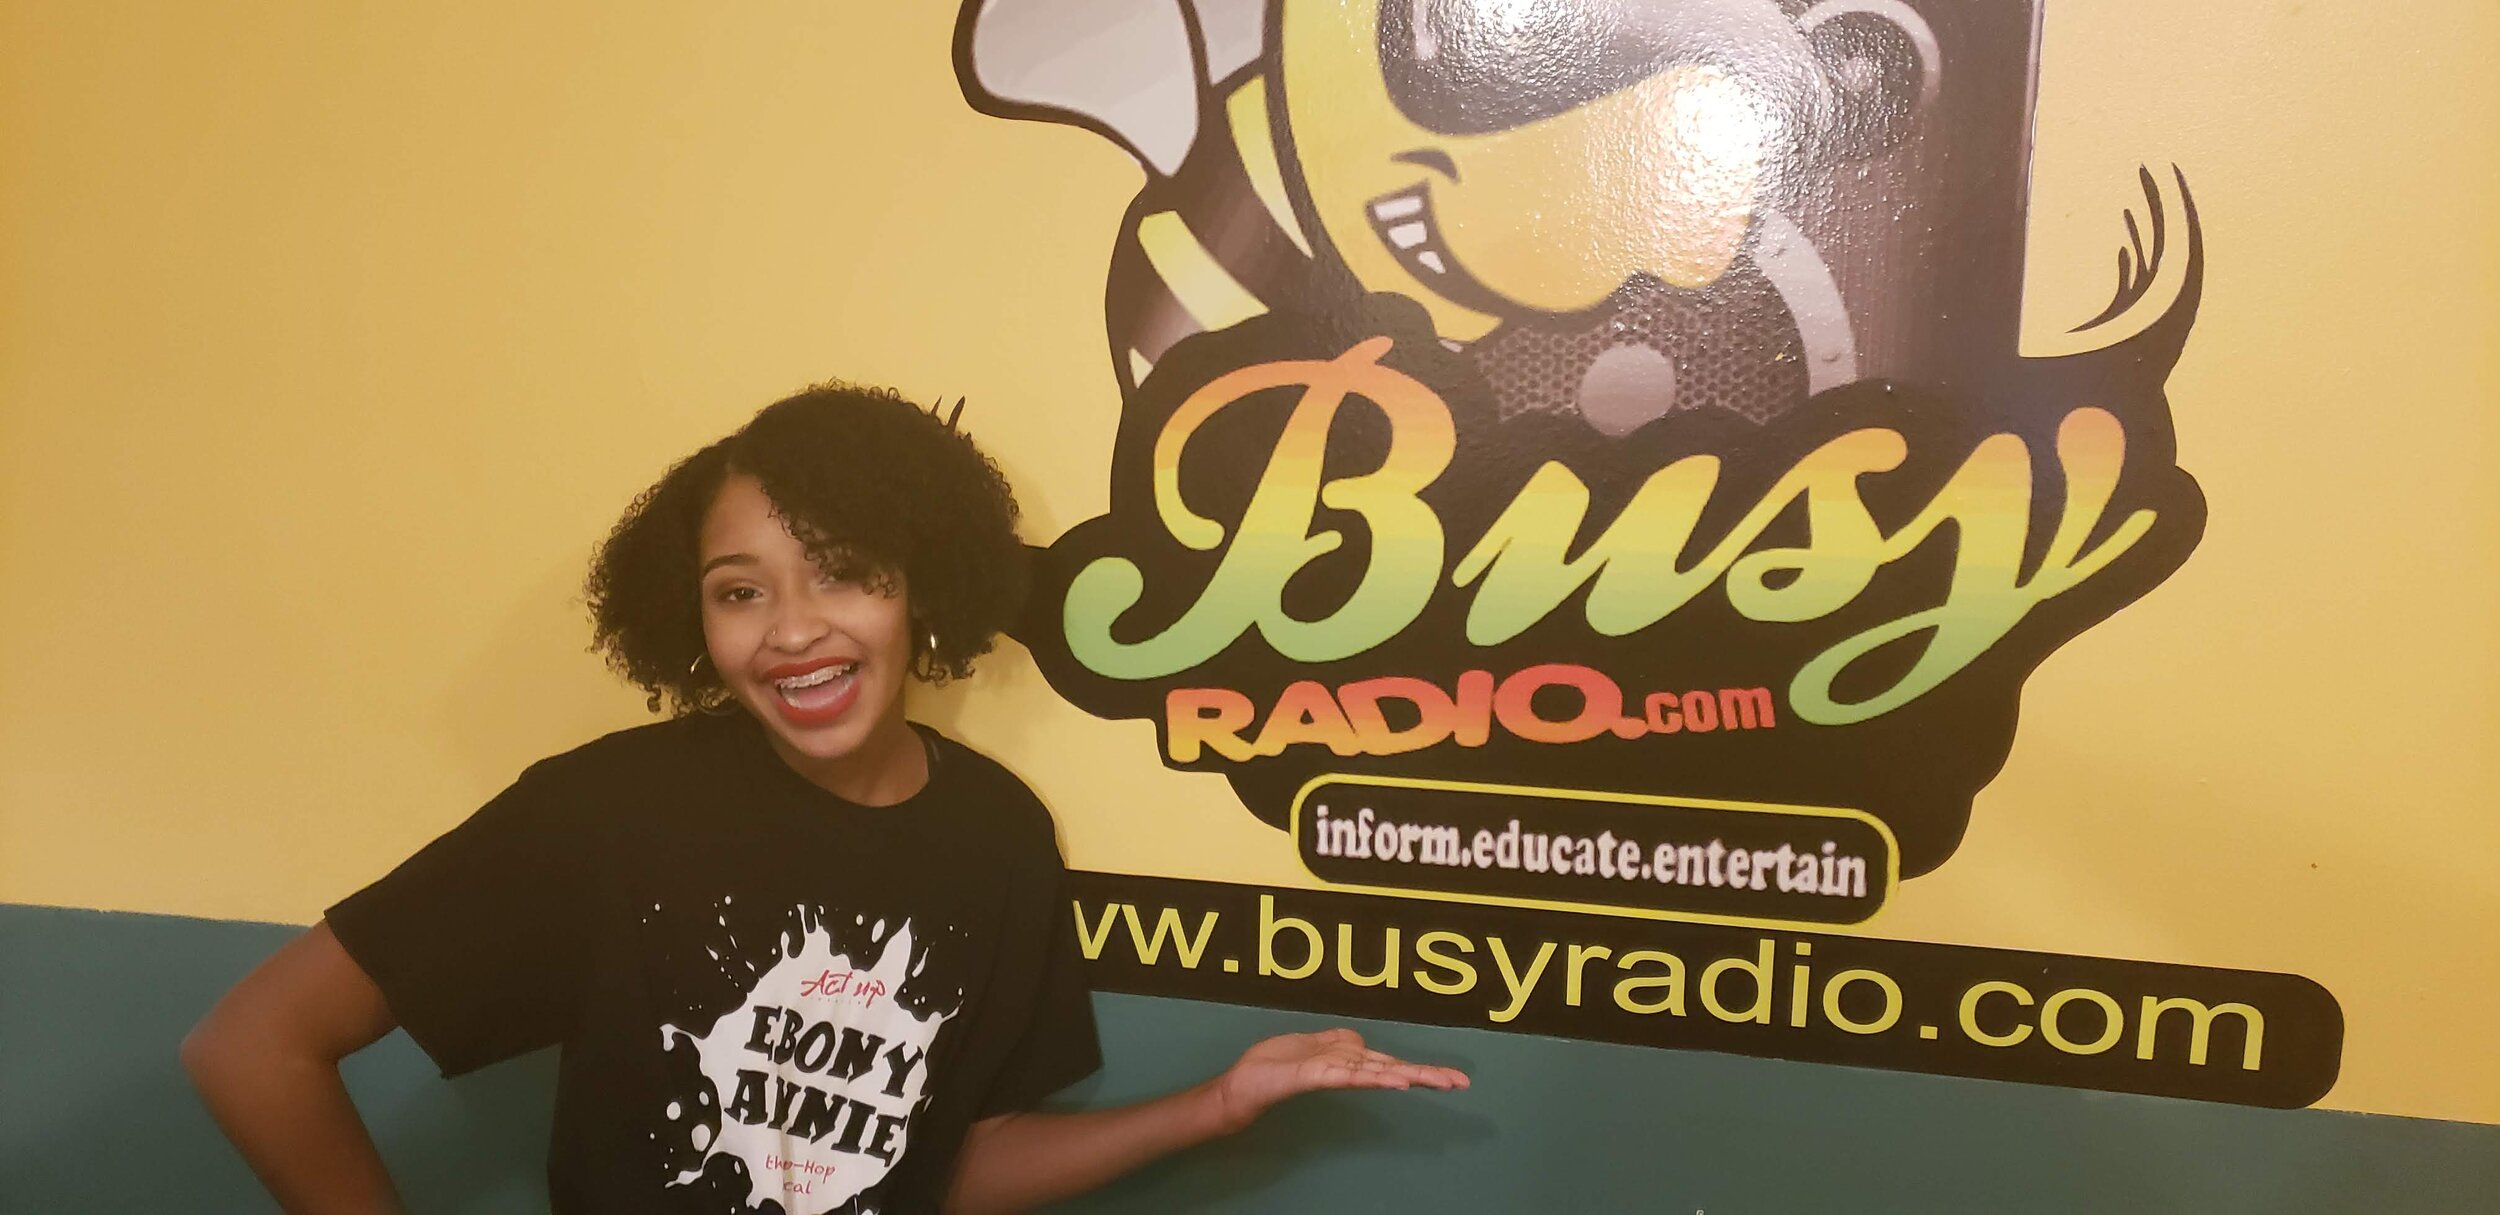  Busy Radio an Internet Radio broadcast focused on Caribbean cultures and news 